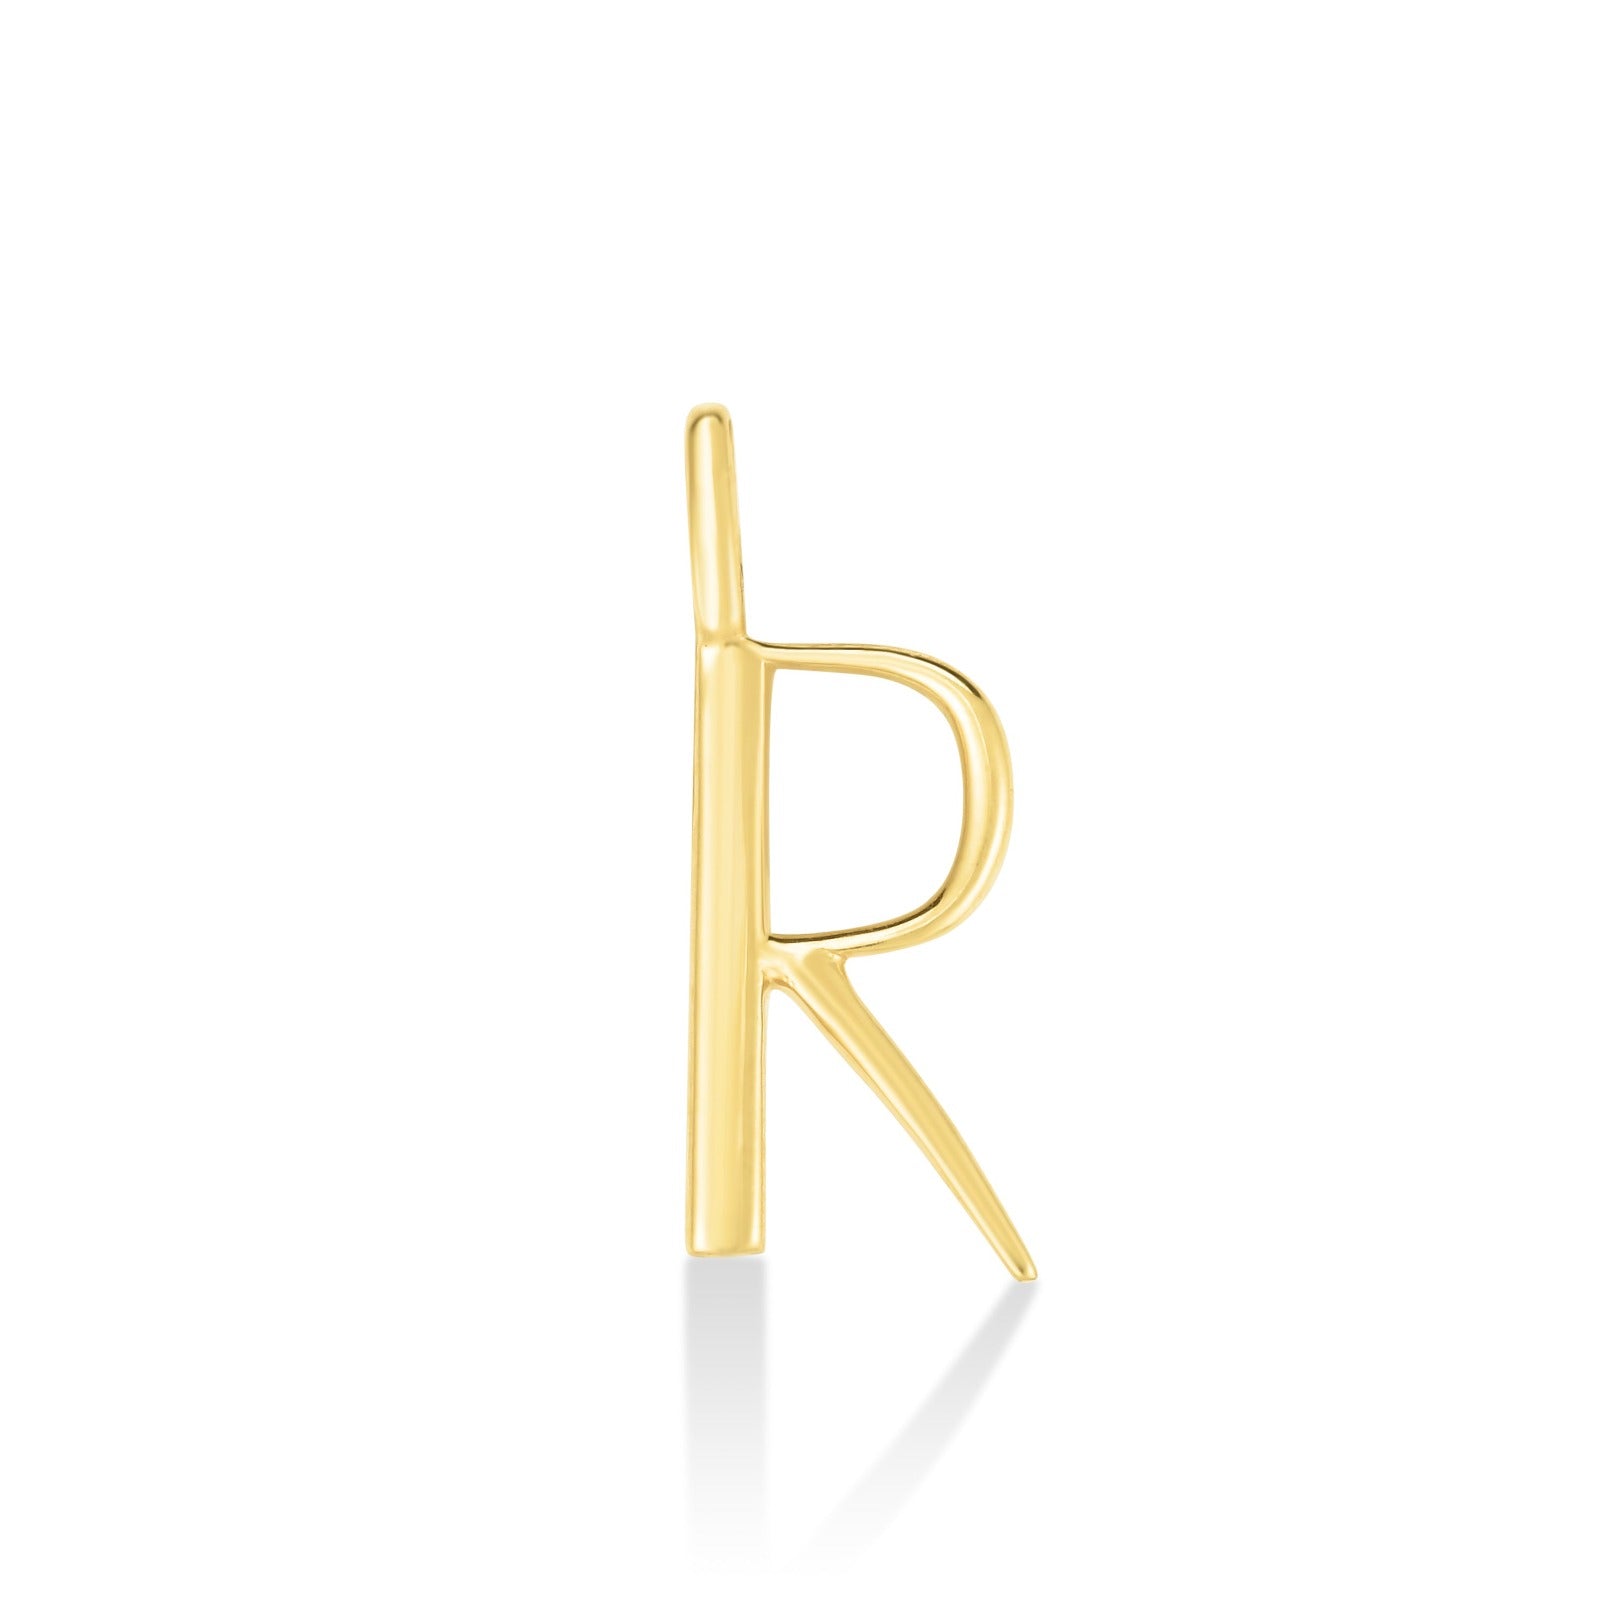 14K yellow gold R letter charm. 